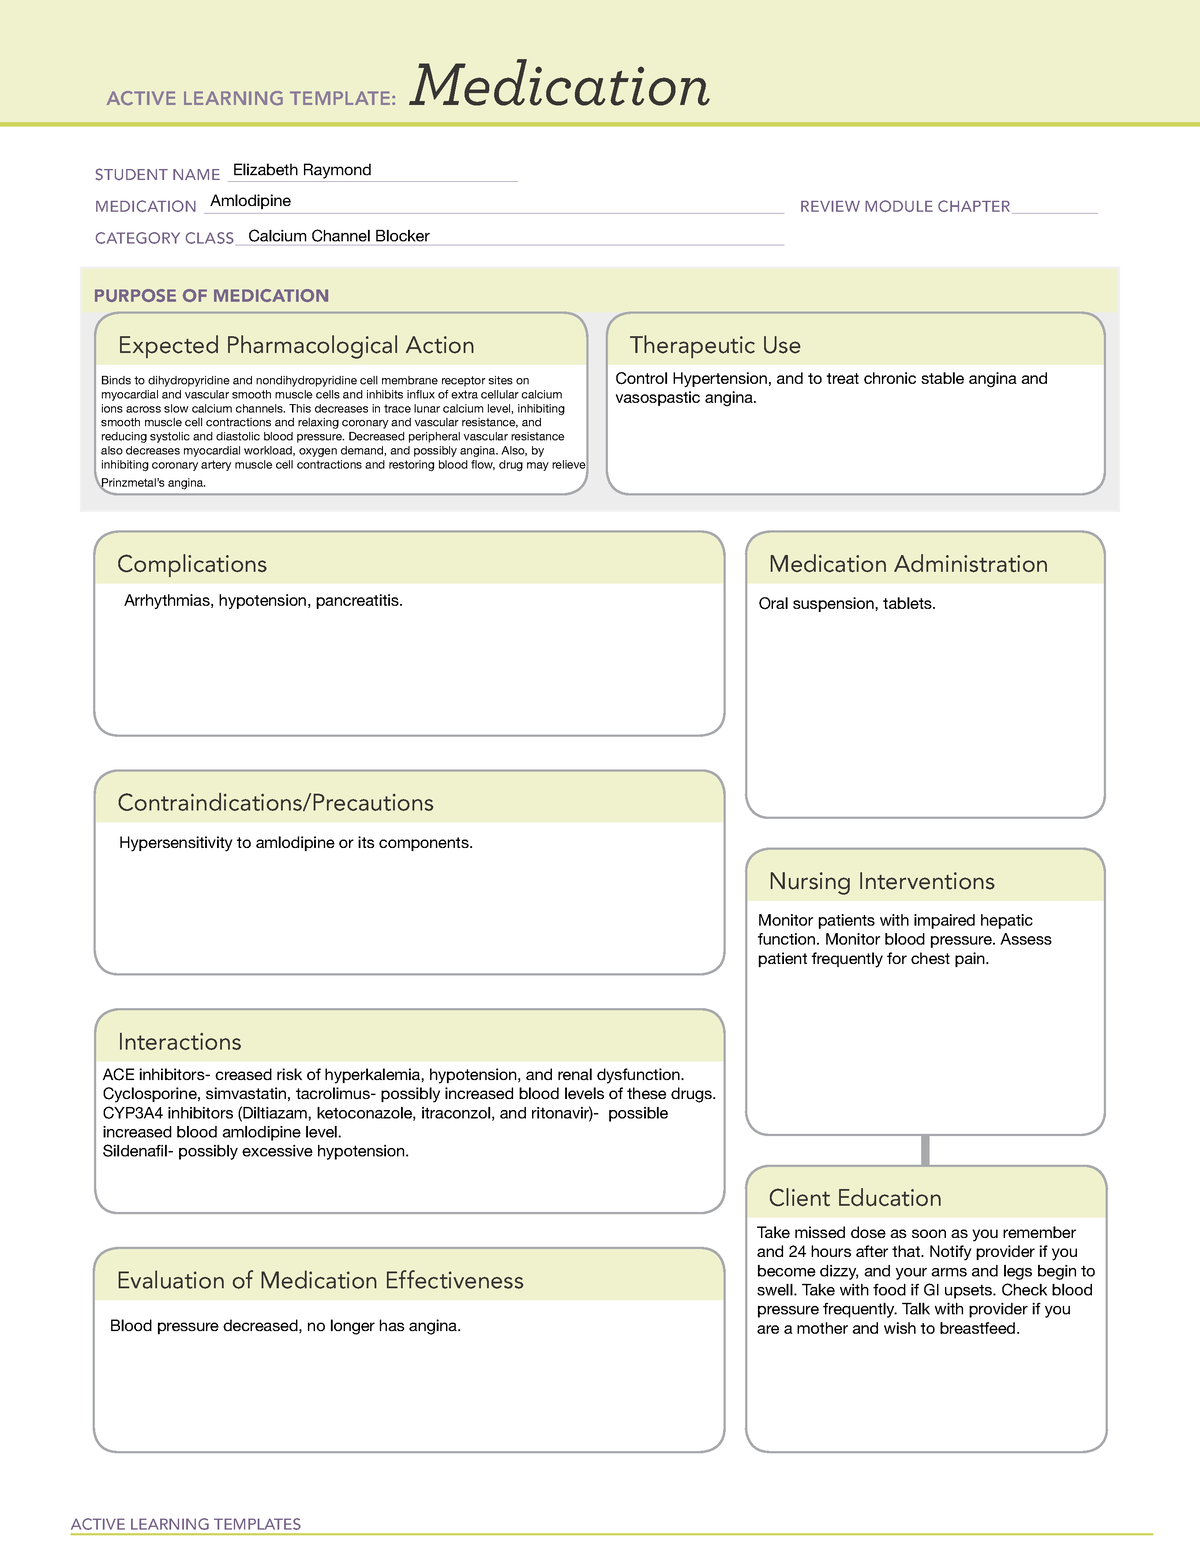 Amlodipine medication ACTIVE LEARNING TEMPLATES Medication STUDENT